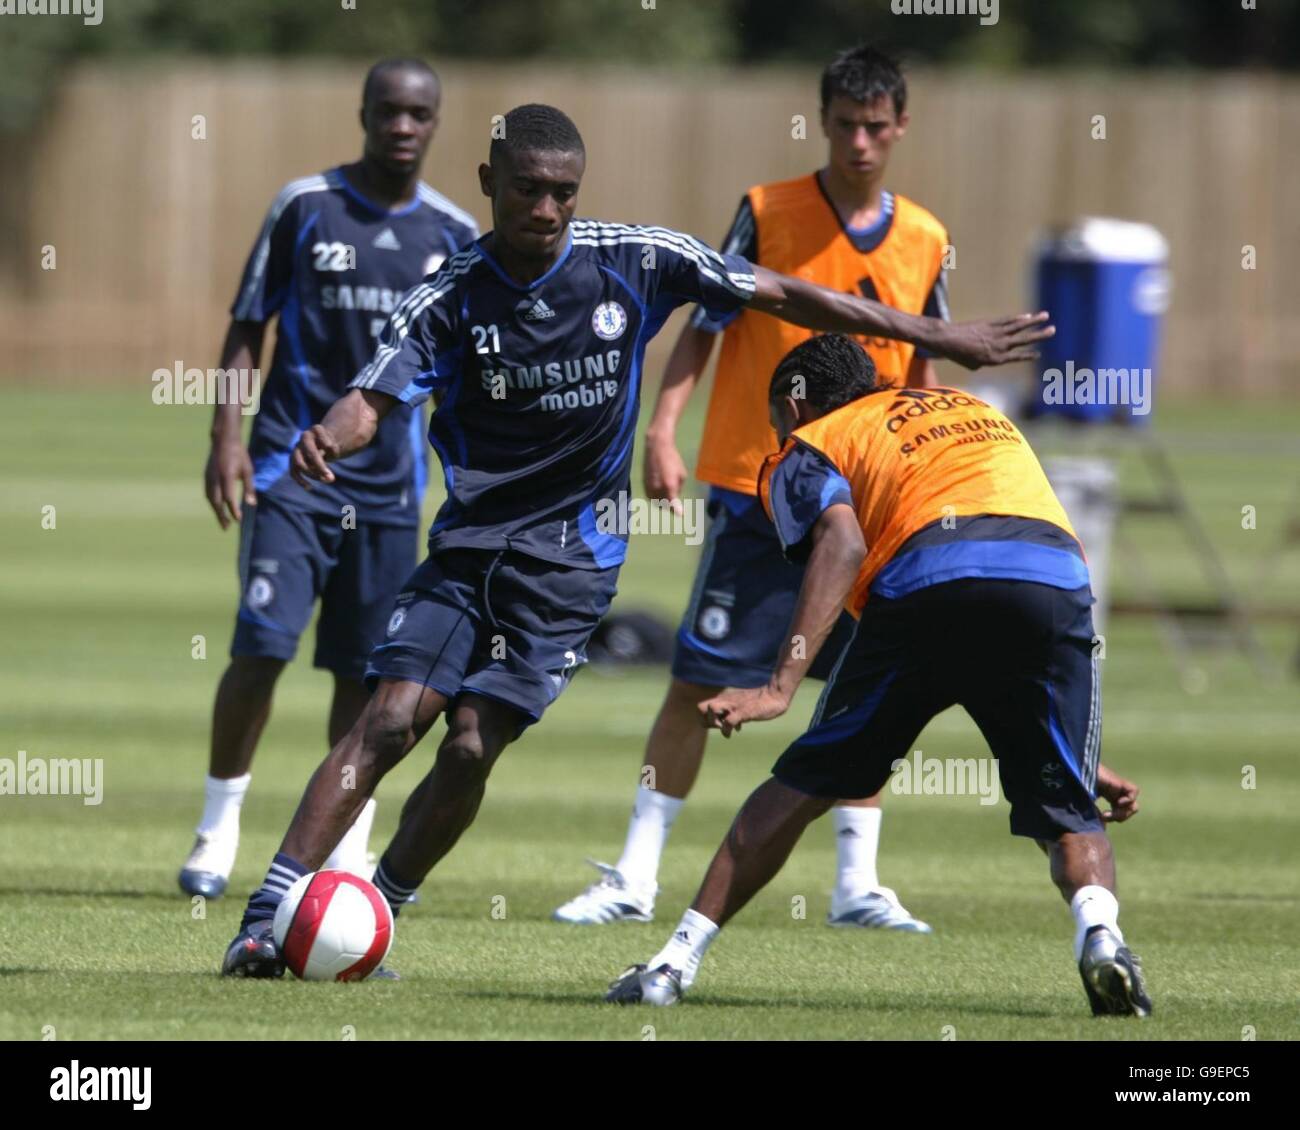 Soccer - Chelsea Training - Cobham. Chelsea's new signing Salomon Kalou in action during a training session at Cobham, Surrey. Stock Photo